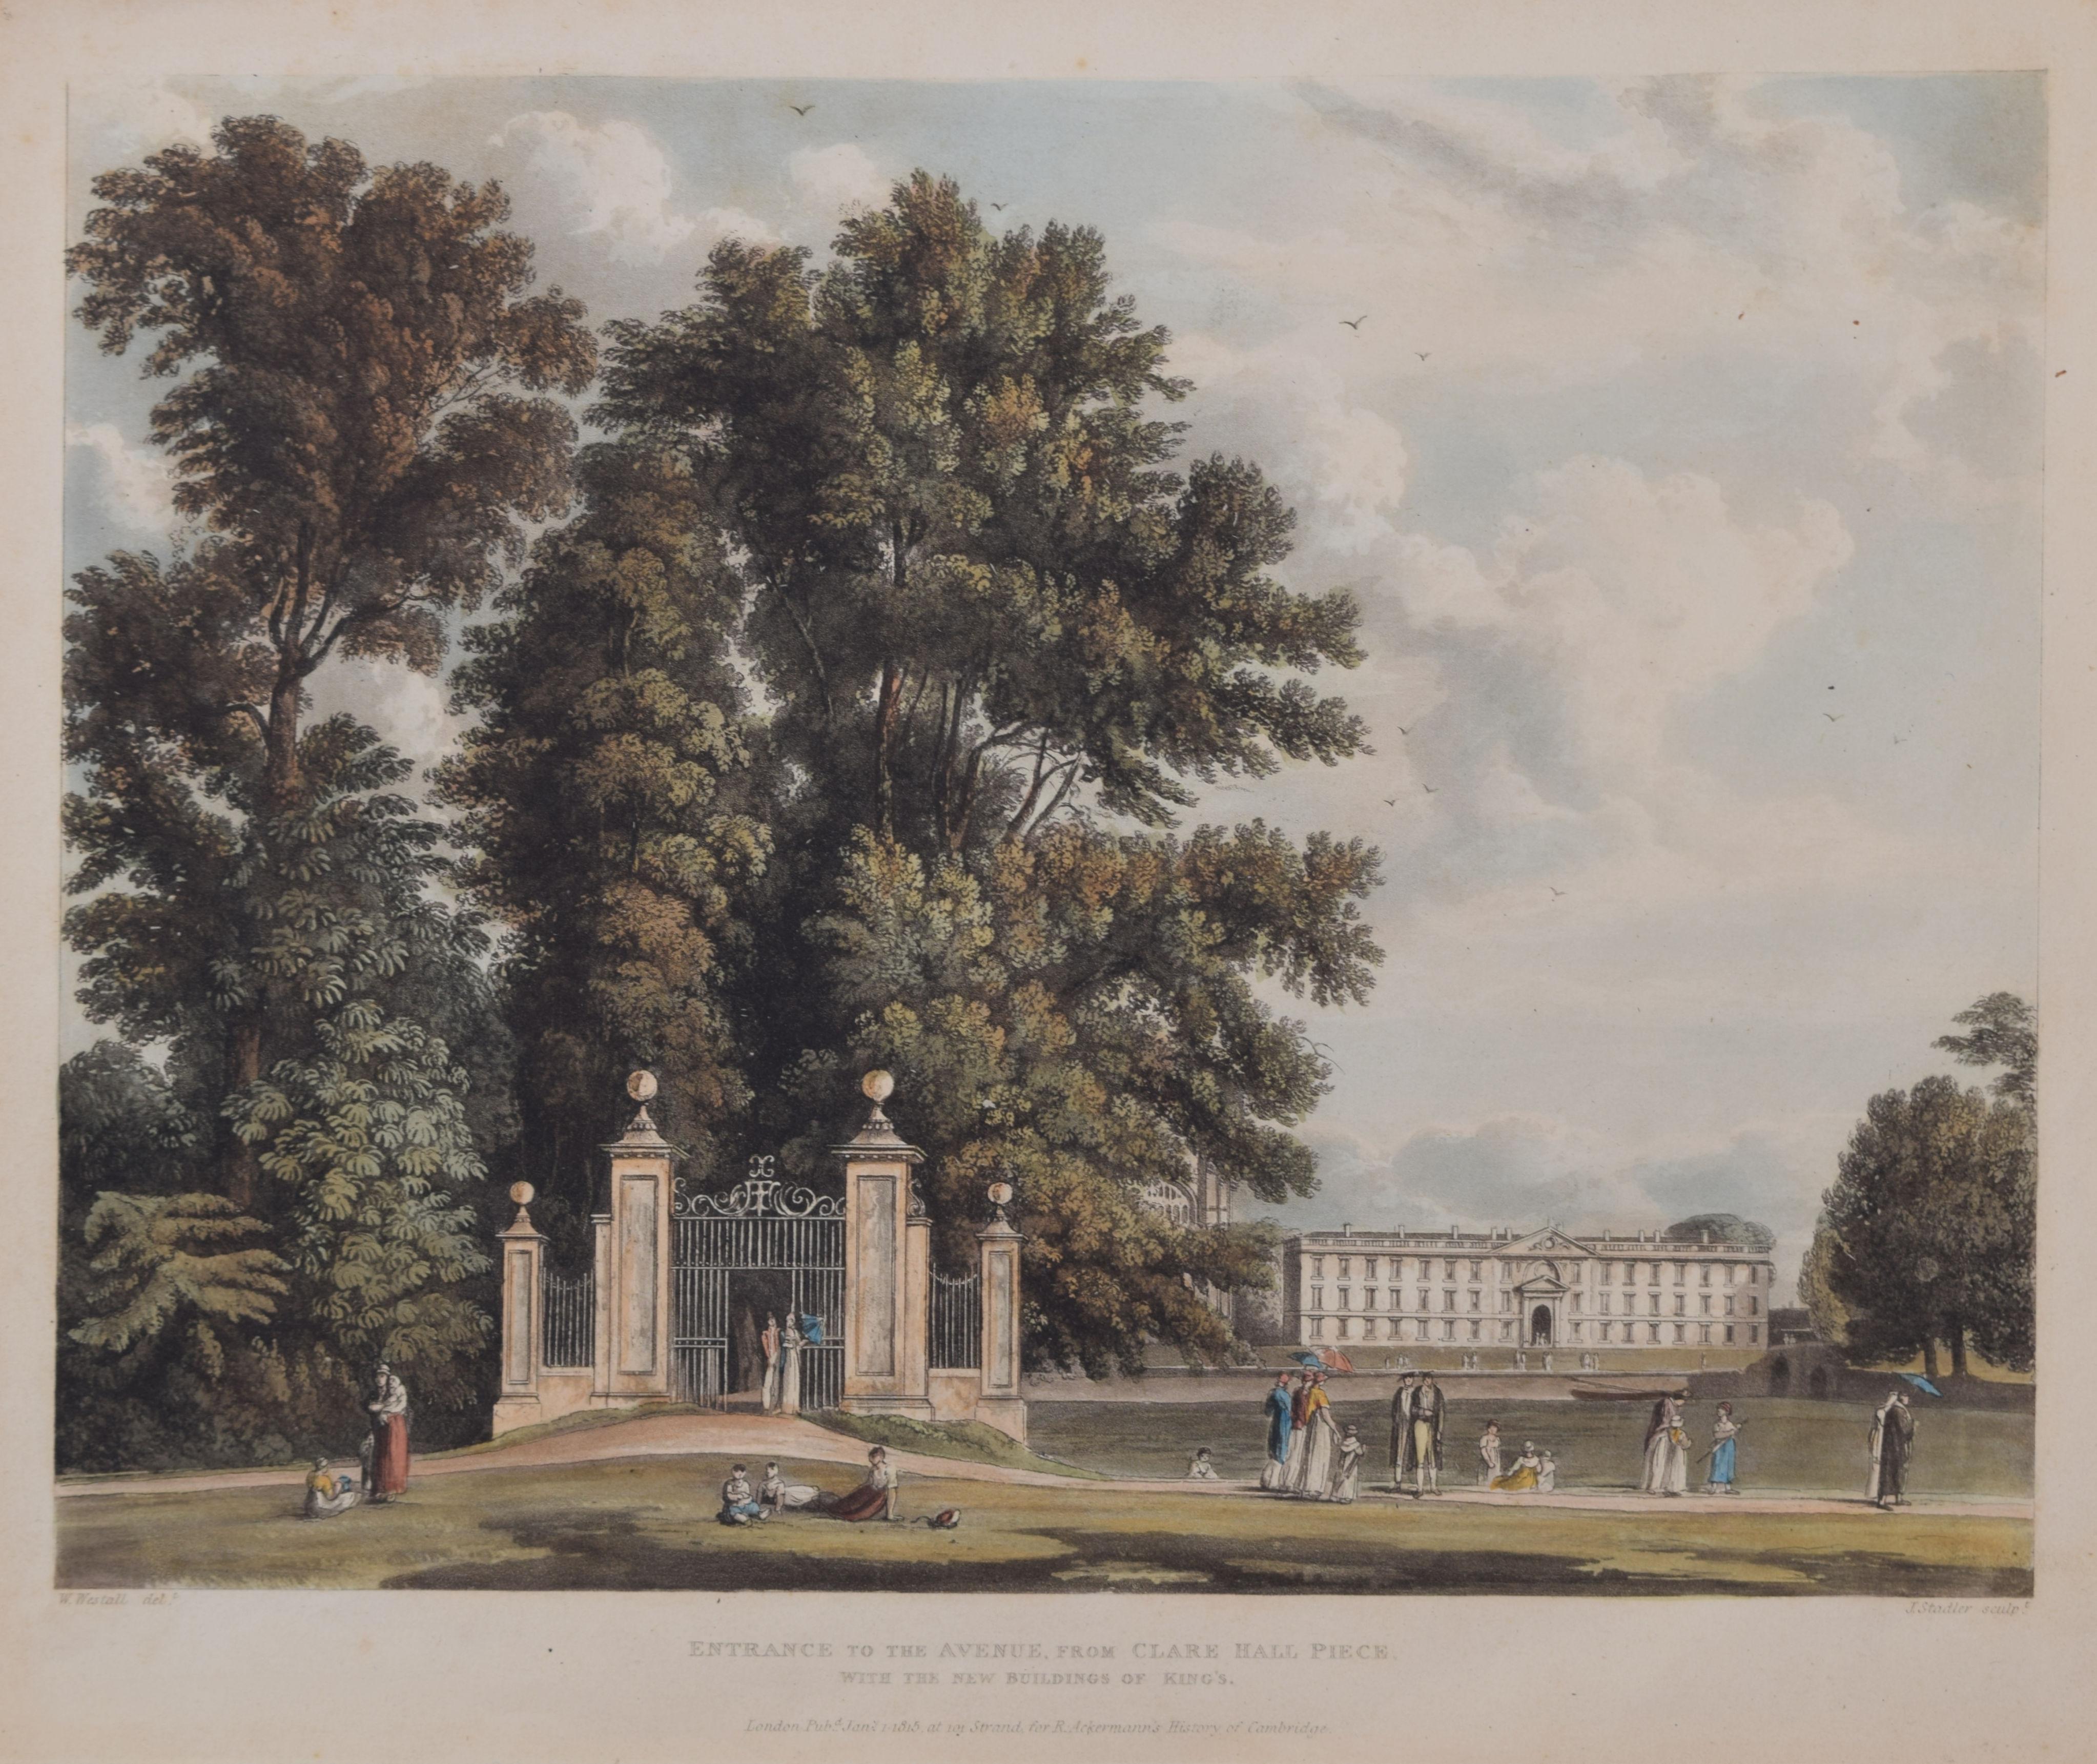 Clare College, Cambridge / Clare Hall / King's College engraving by Stadler